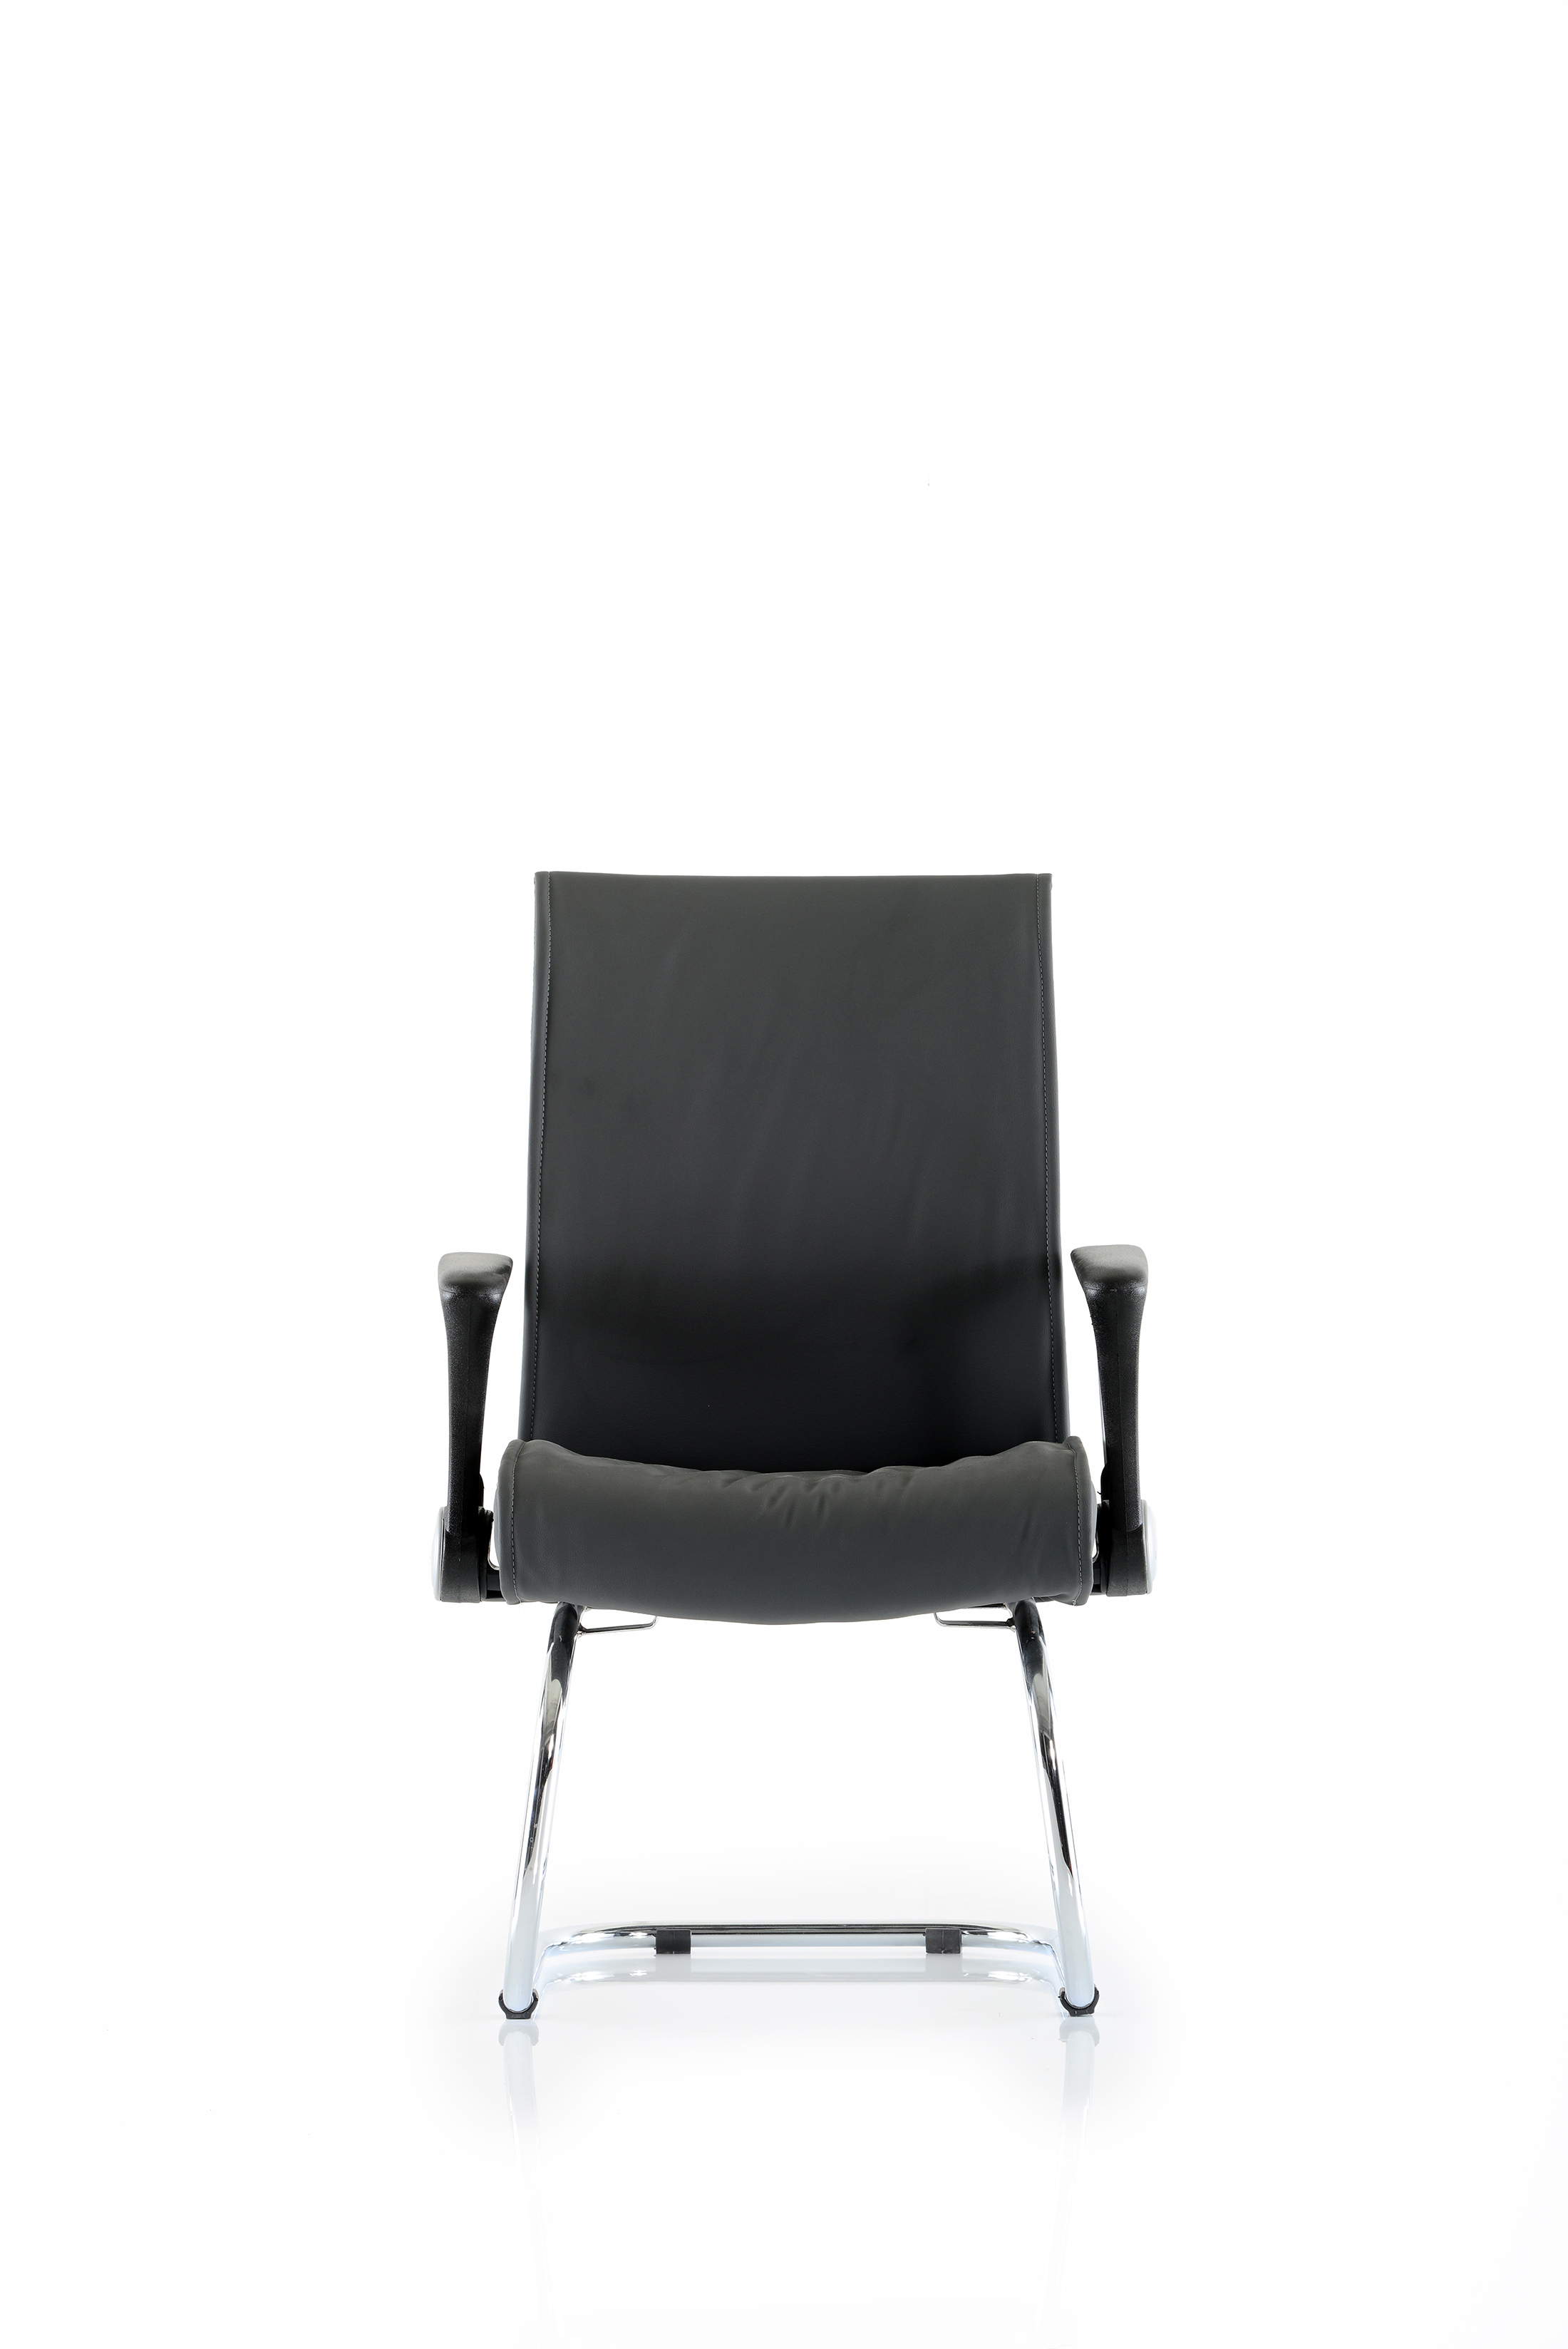 ULTIMA 300C VISITOR CHAIR